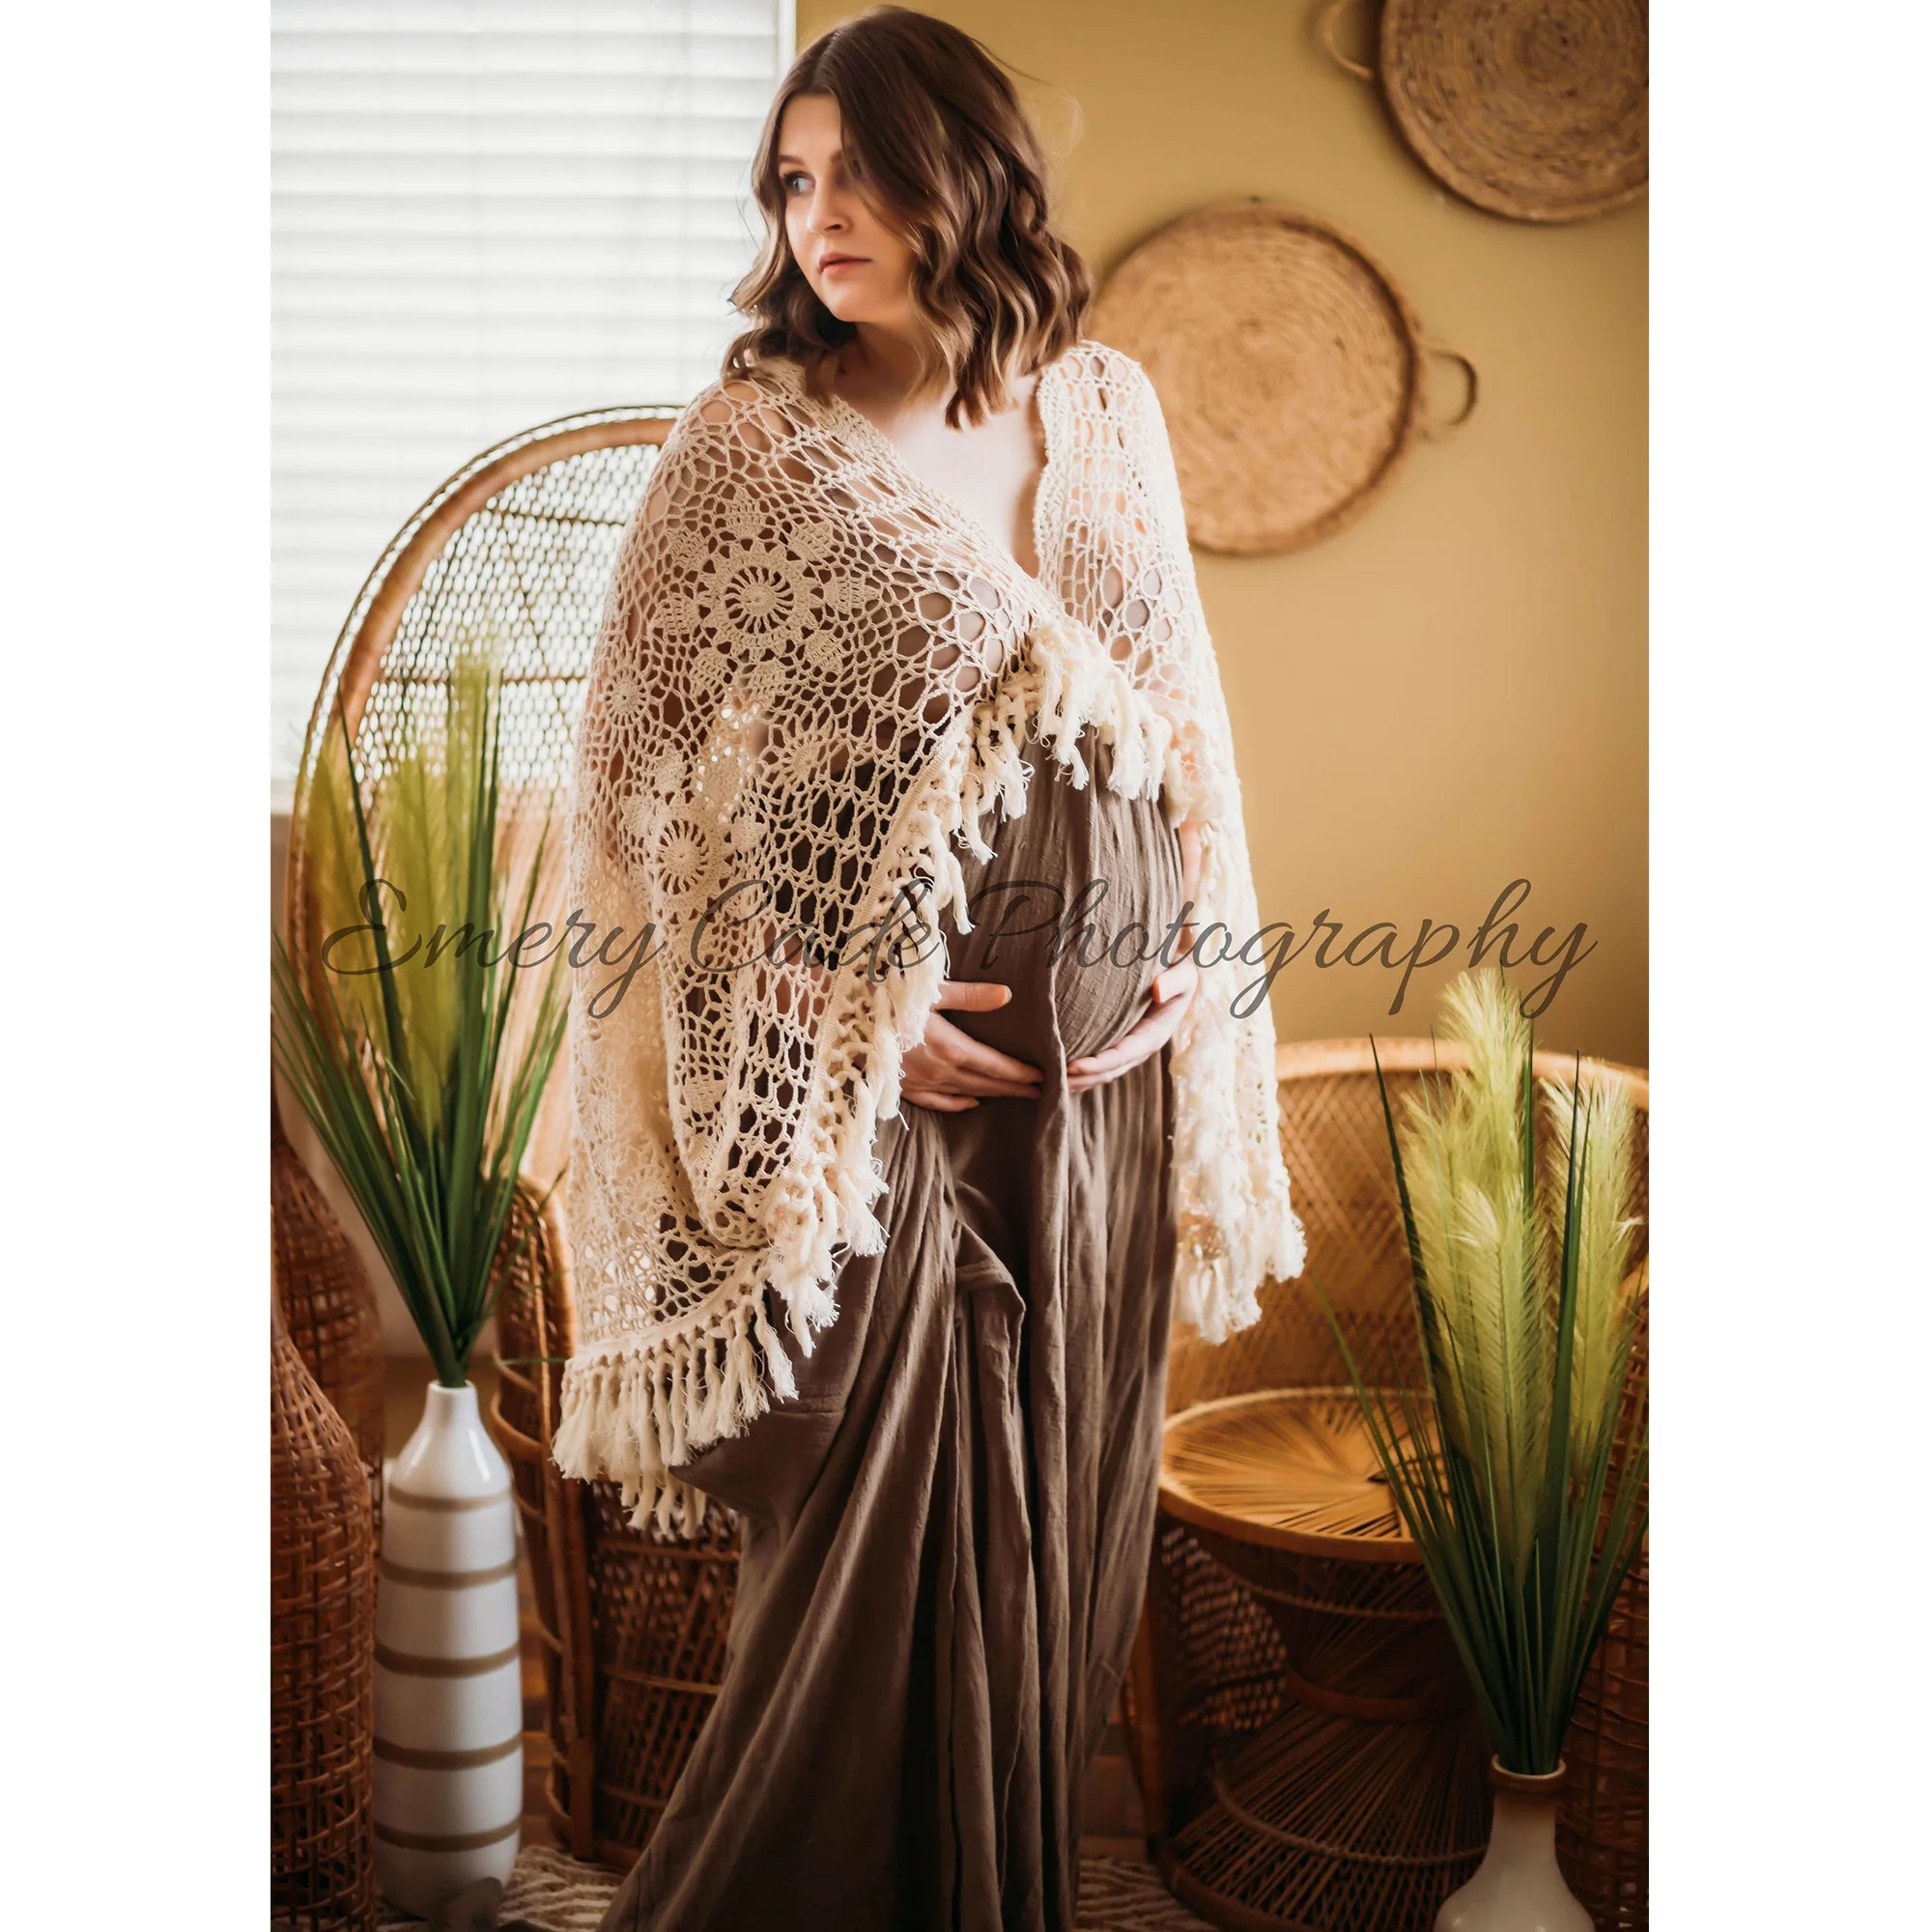 Enlarge Vintage Boho Emboridery Cotton Photo Shoot Pregnant Robe Maternity Dress Evening Party Costume Women Photography Accessories